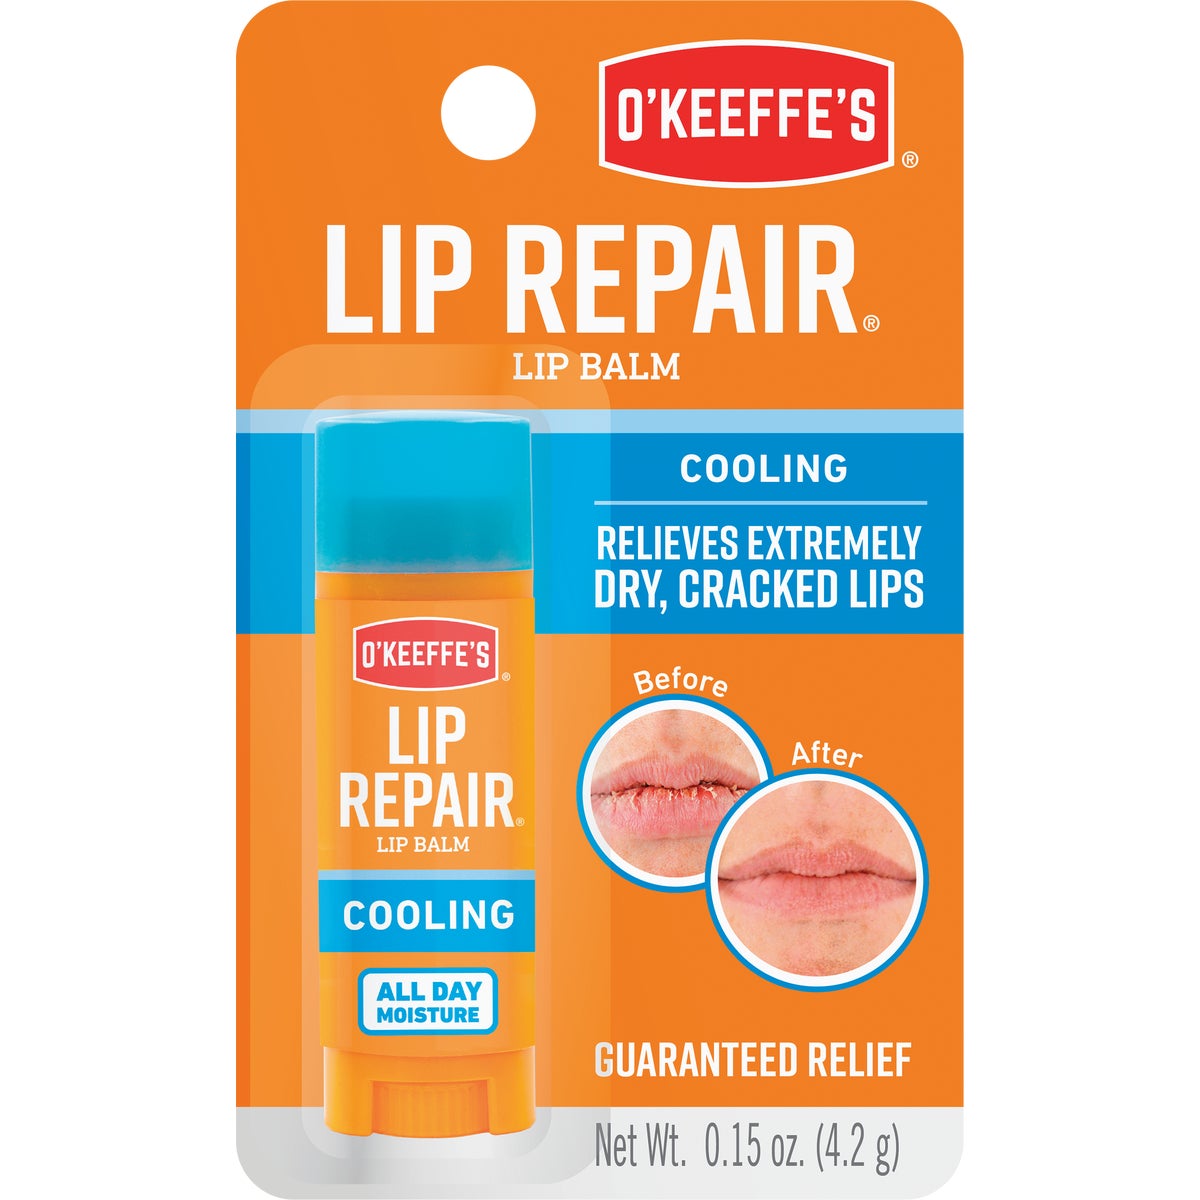 Item 704886, O'Keeffe's cooling relief lip repair lip balm. Cools on contact.